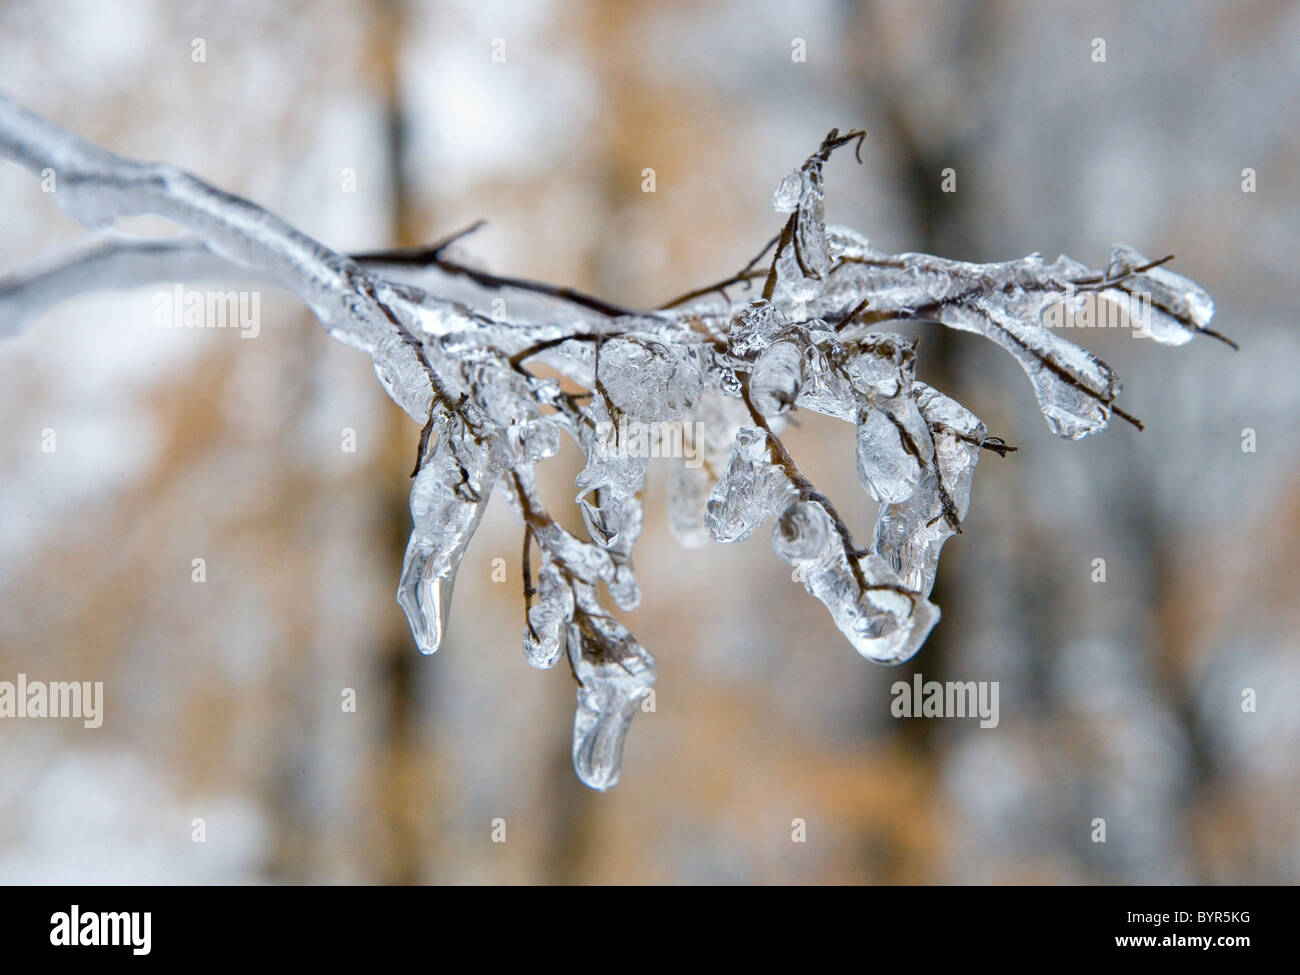 An iced up twig after an ice storm in winter Stock Photo